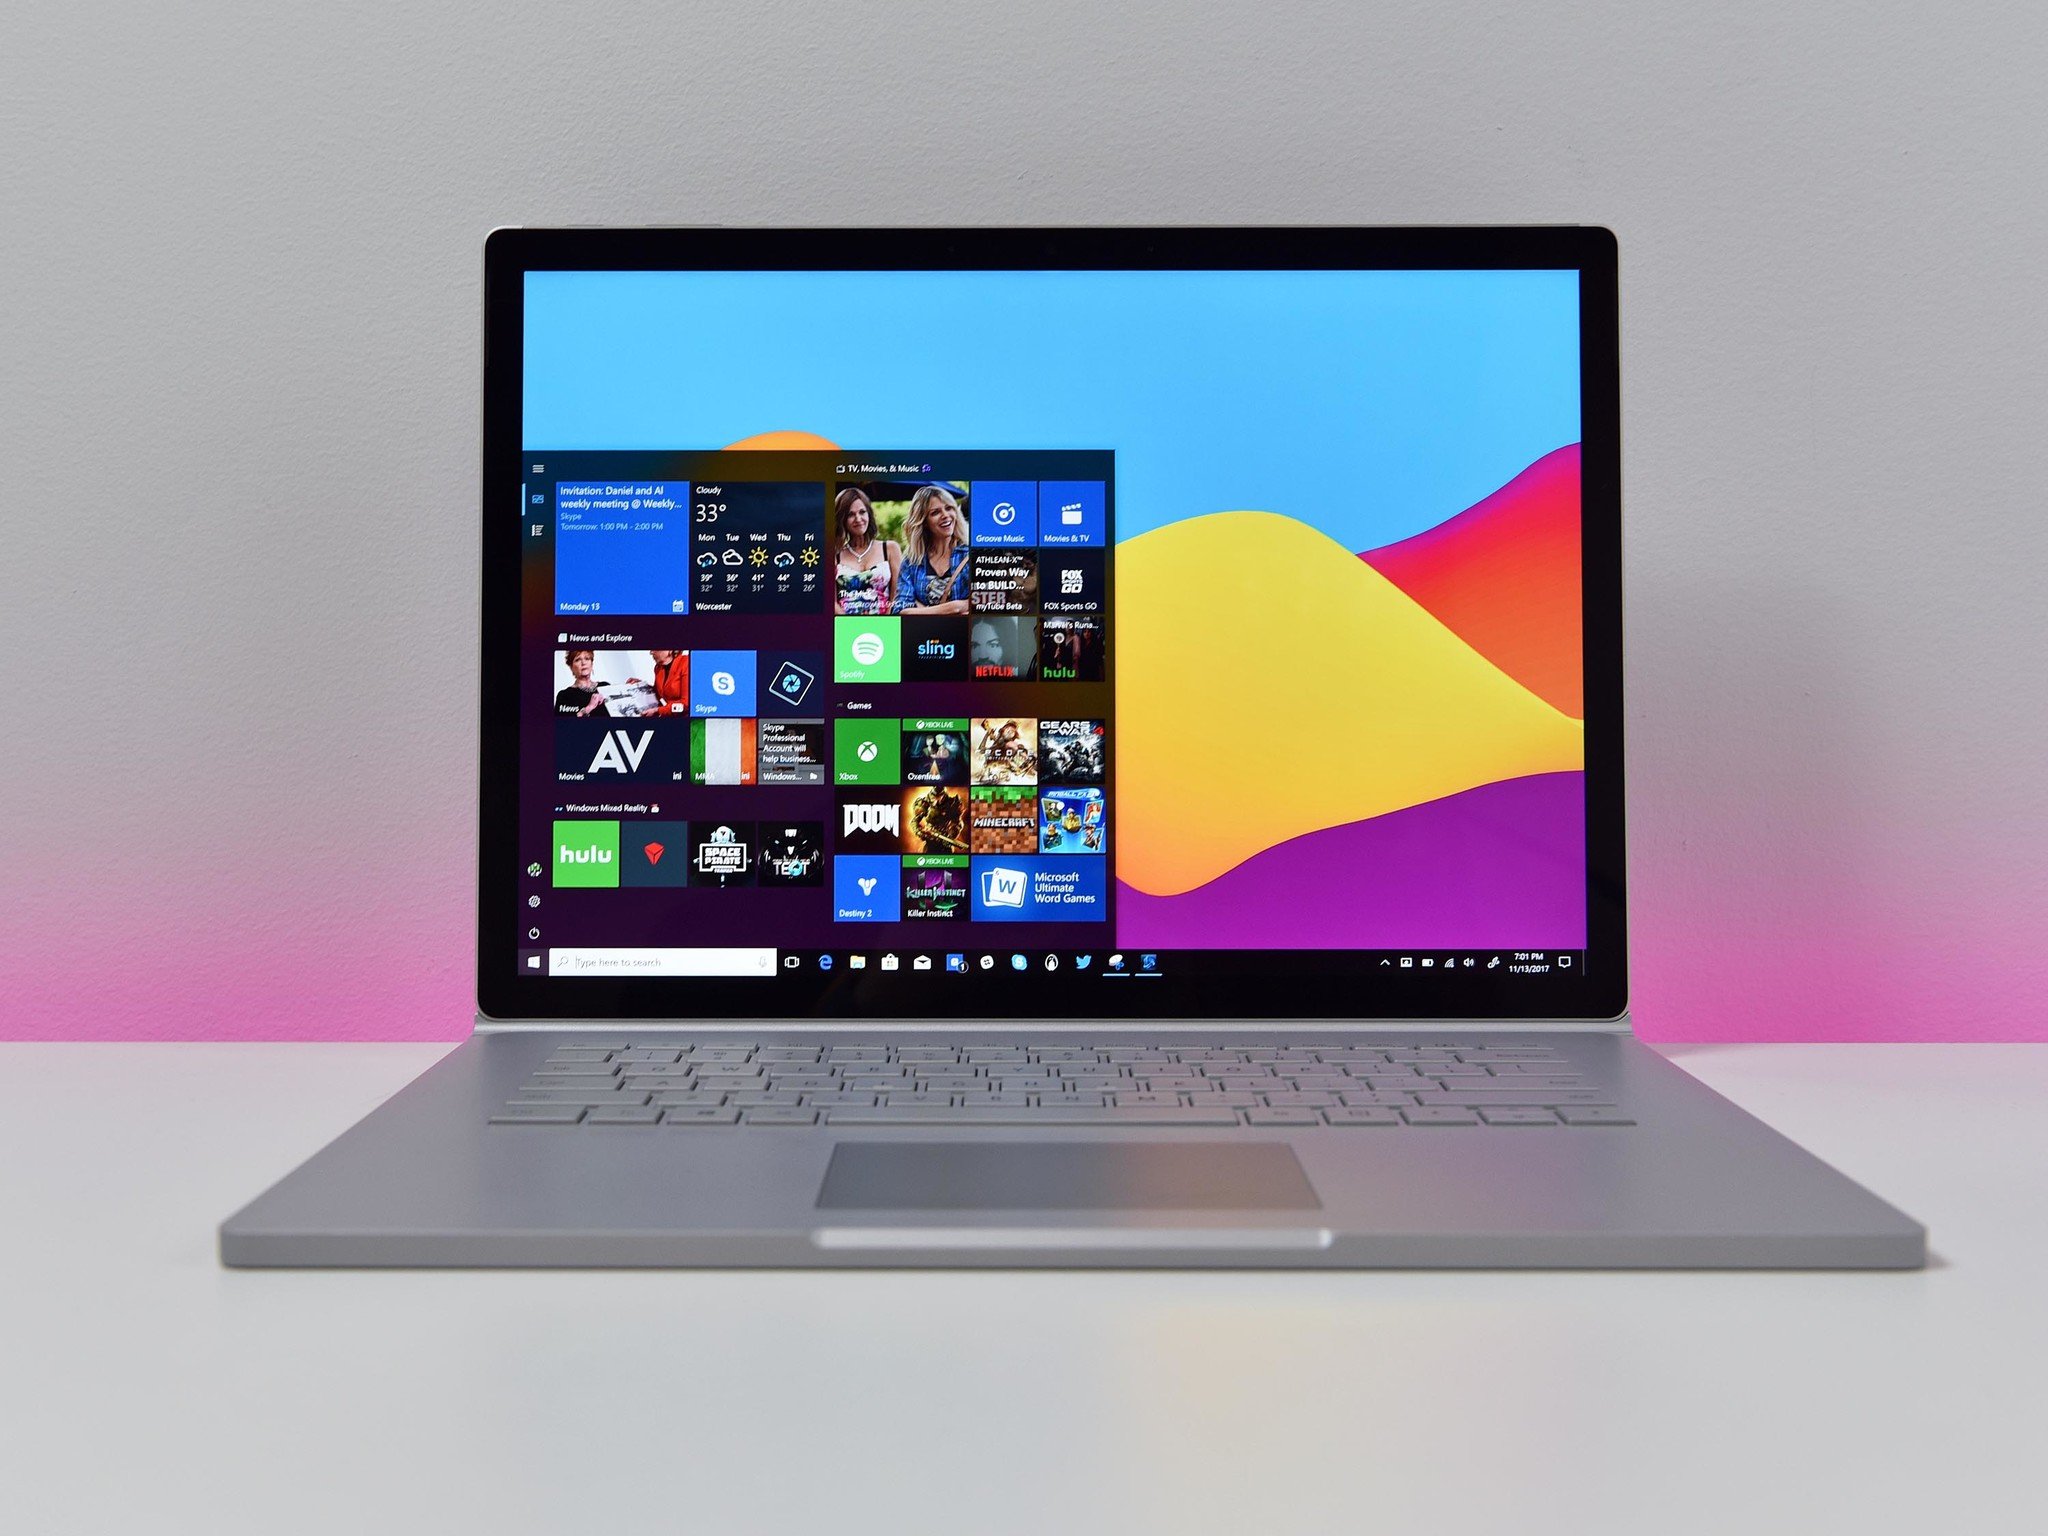 https://www.windowscentral.com/sites/wpcentral.com/files/styles/large_wm_brb/public/field/image/2017/11/Surface-Book-2-15-hero-1_0.jpg?itok=dlnTNGRU